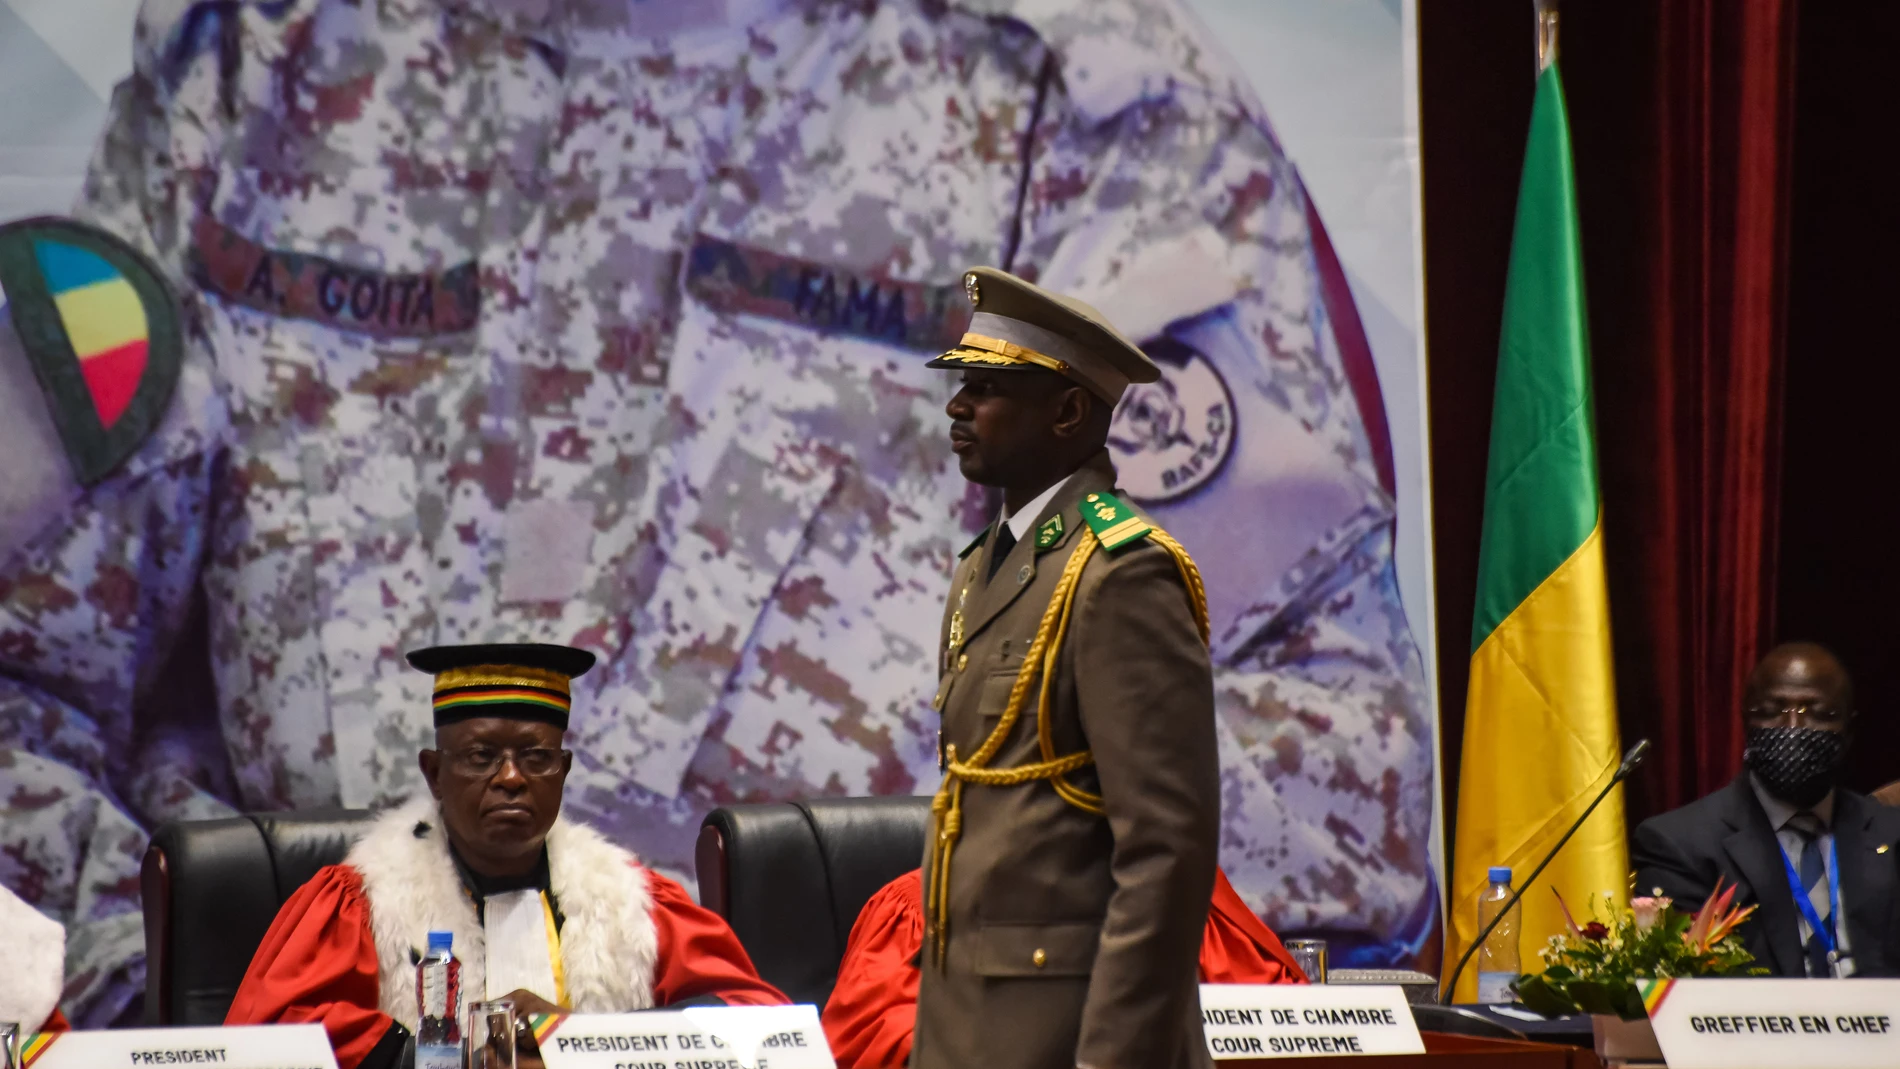 June 7, 2021, Bamako, Bamako District, Mali: His Excellency Colonel Assimi Goita was awarded the ''Grand Cross of the National Order of Mali'' during the inauguration ceremony of the President of the Transition, which took place this Monday, June 7, at the International Conference Center of Bamako (Foto de ARCHIVO) 07/06/2021